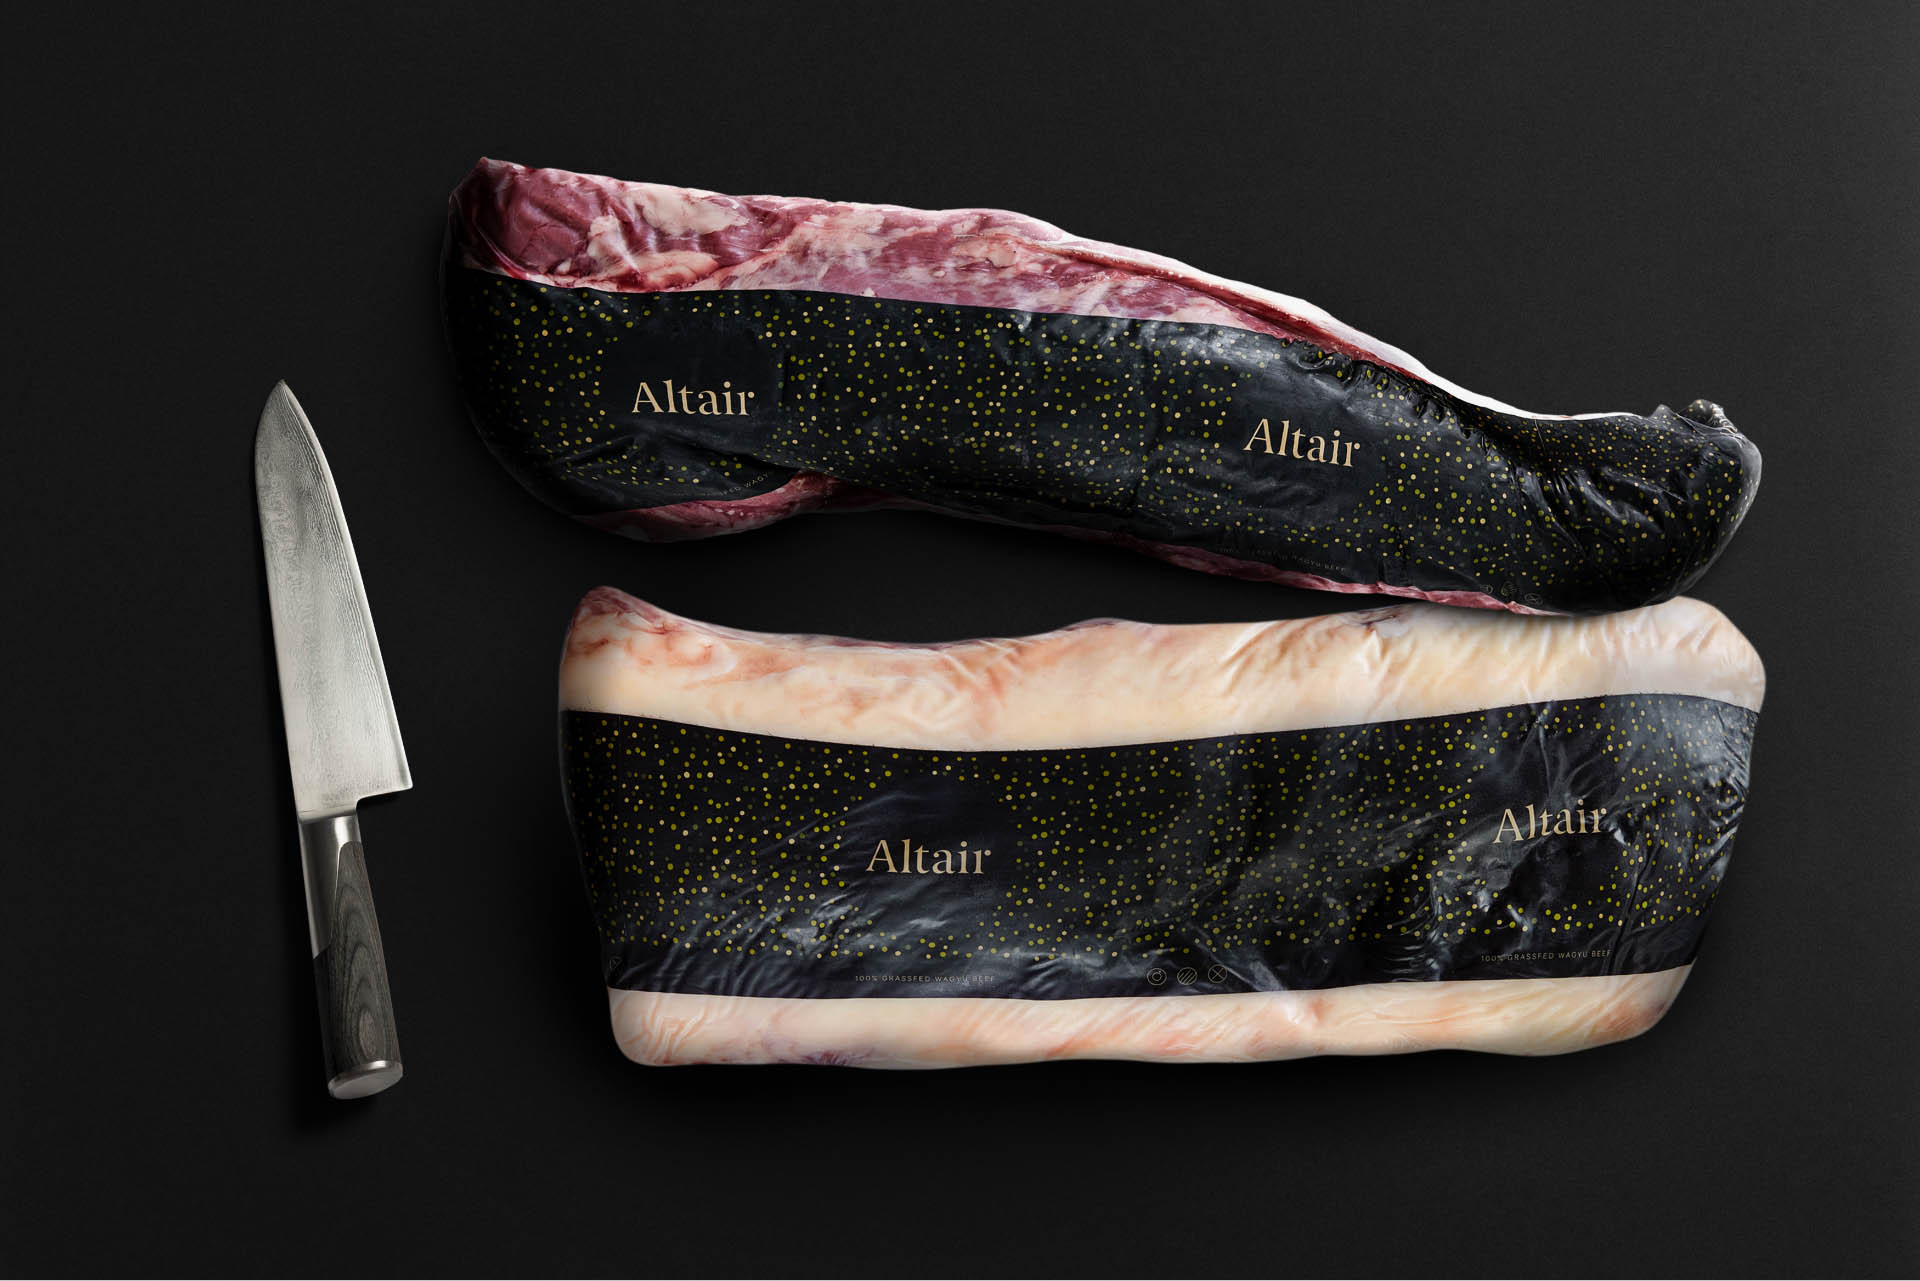 Two shrink wrapped piece's of meat, with Altair branding on them, next to a meat cutting knife.